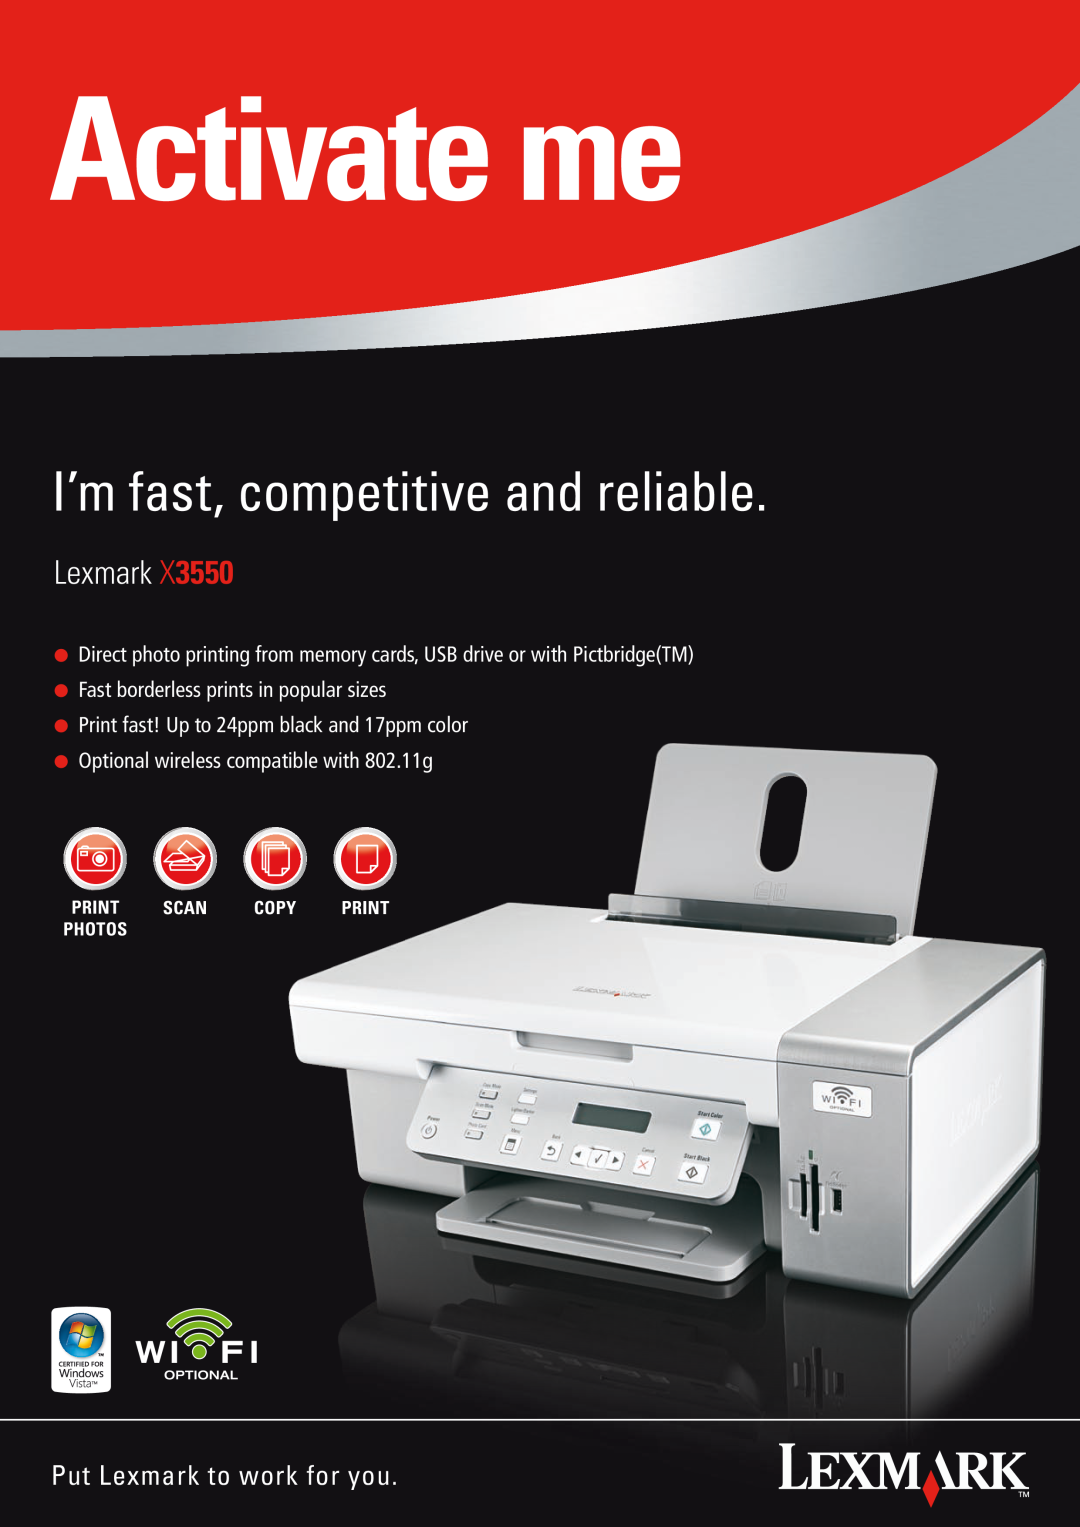 Lexmark X3550 manual Activate me, I’m fast, competitive and reliable, Put Lexmark to work for you 